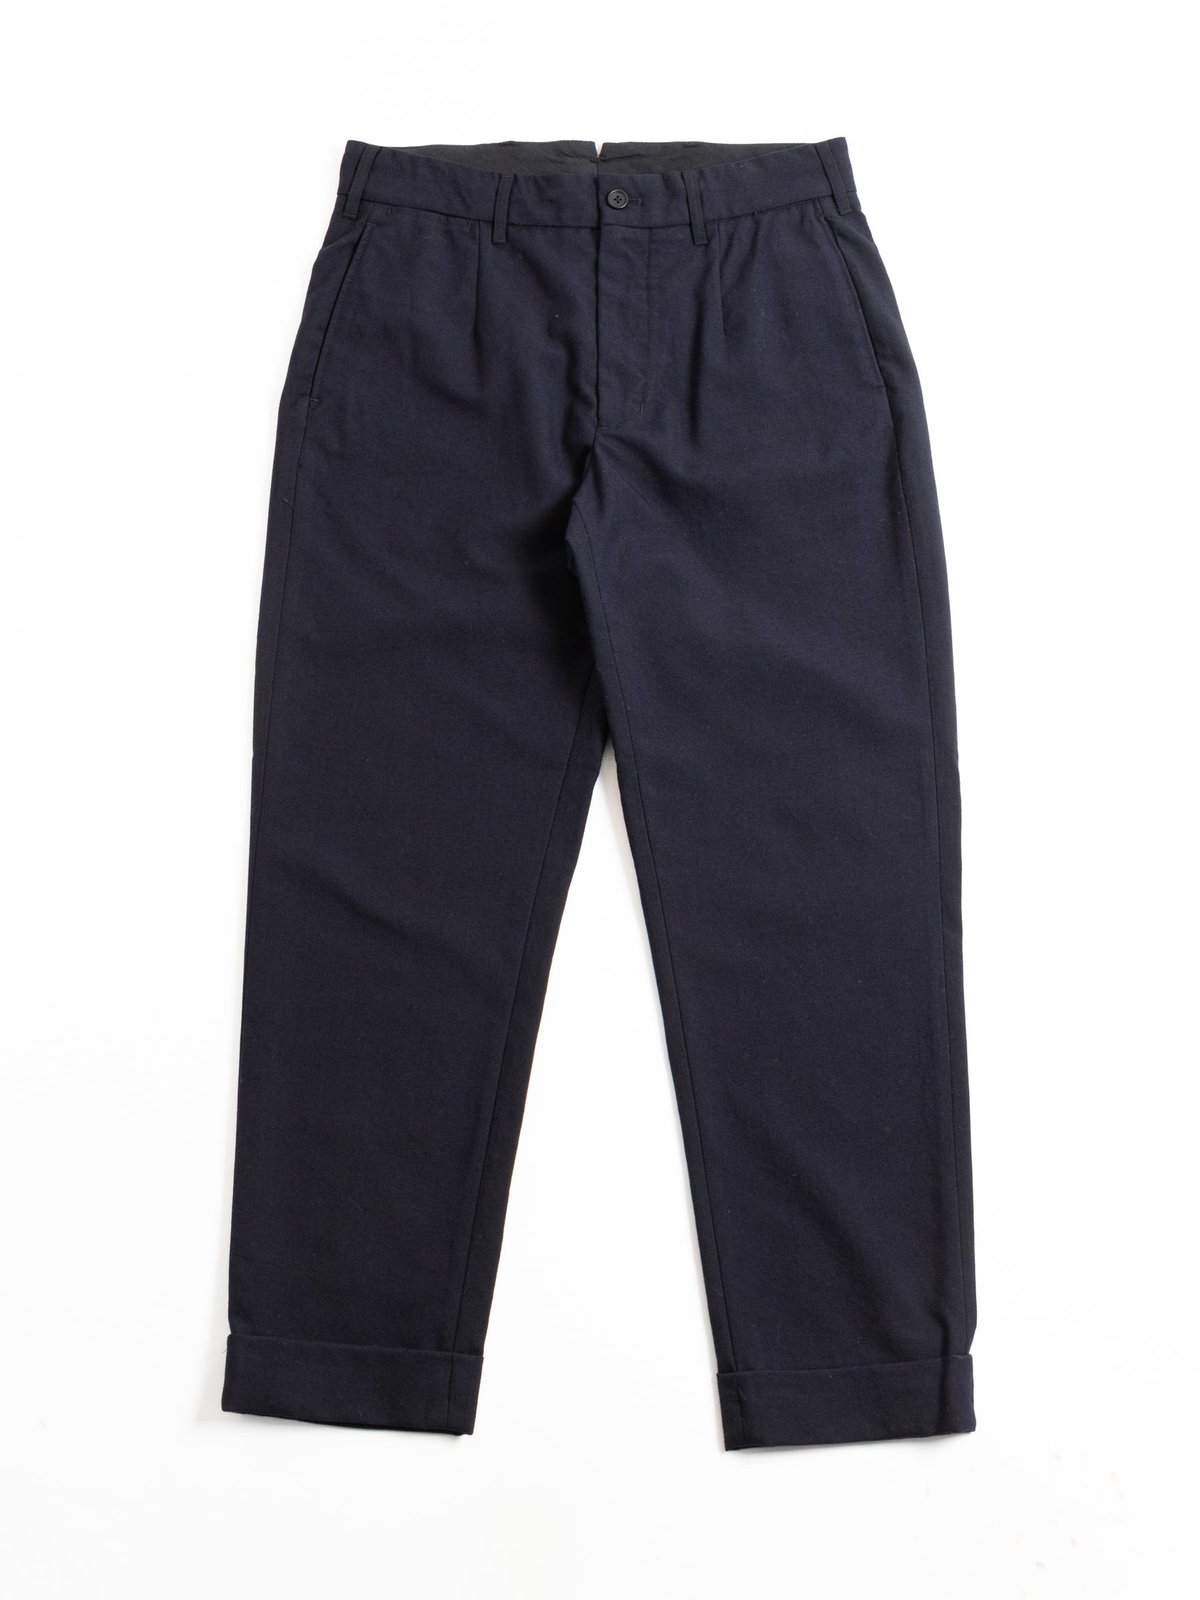 ANDOVER PANT DARK NAVY UNIFORM SERGE by Engineered Garments – The 